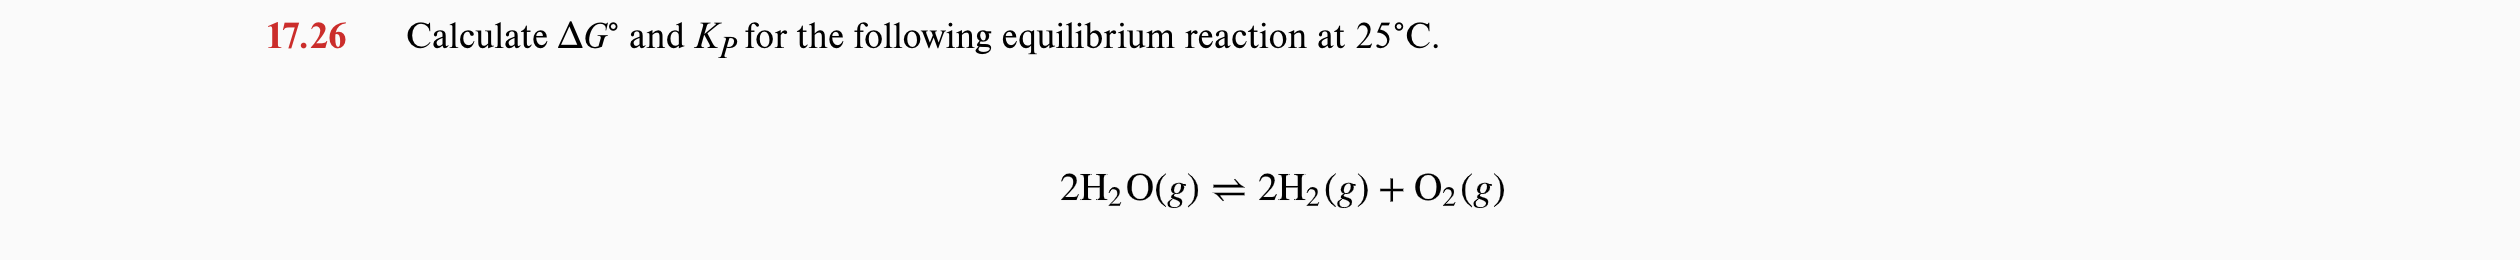 17.26
Calculate AG° and Kp for the following equilibrium reaction at 25°C.
2H2O(g) = 2H2 (g) + O2(g)
